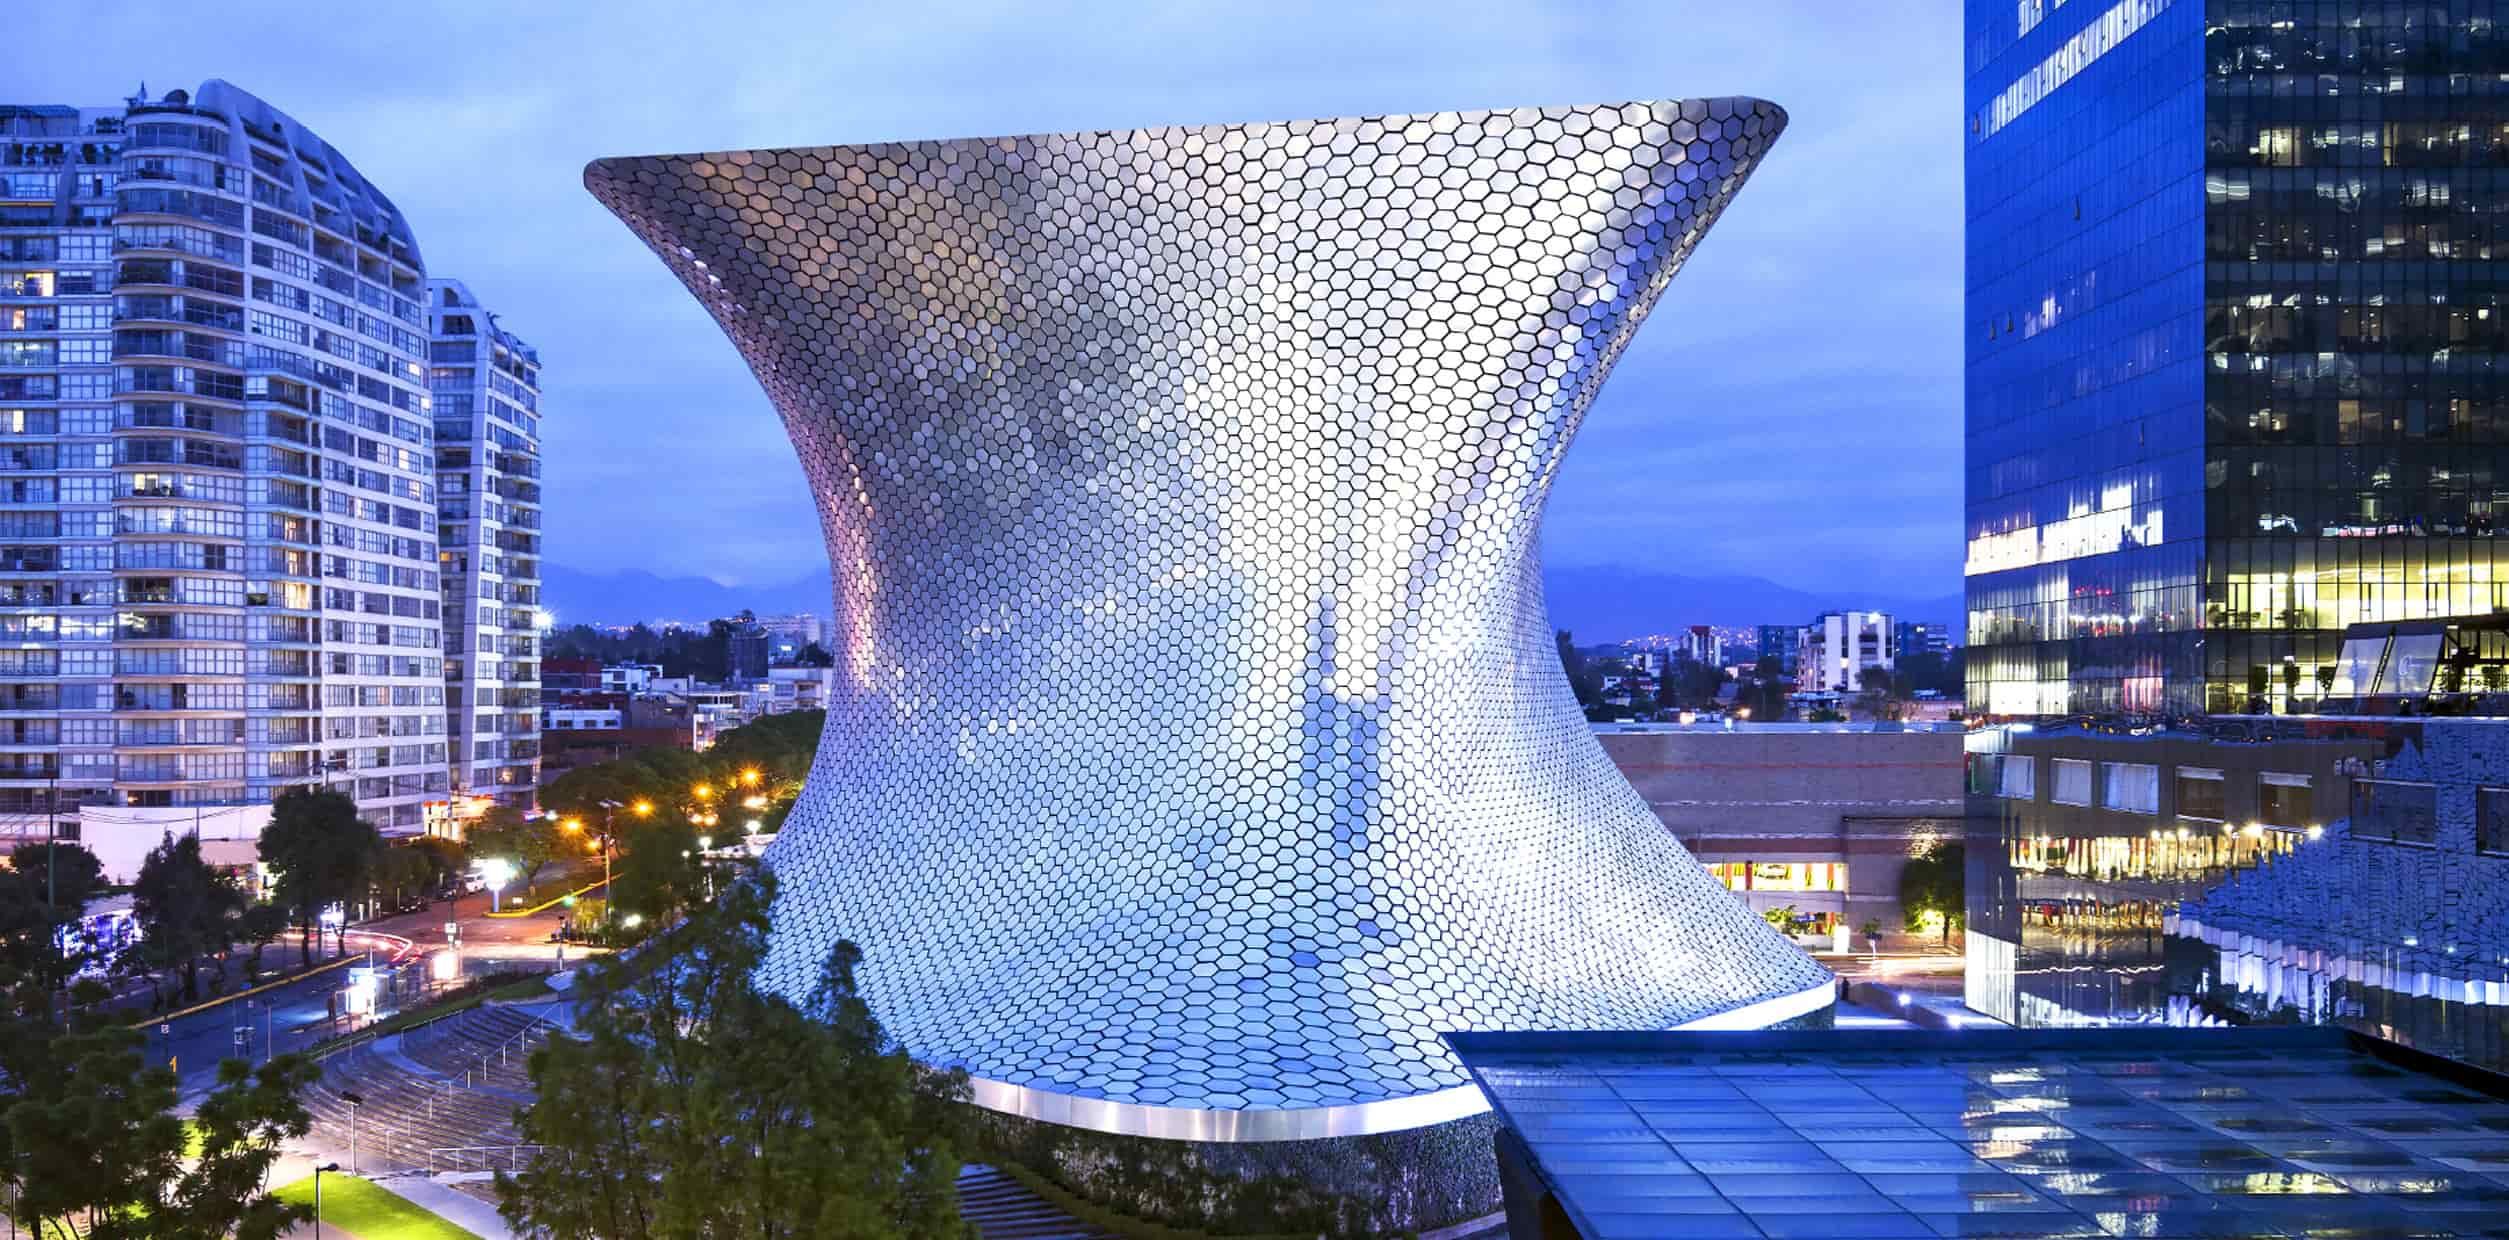 Museo Soumaya with its surrounding buildings